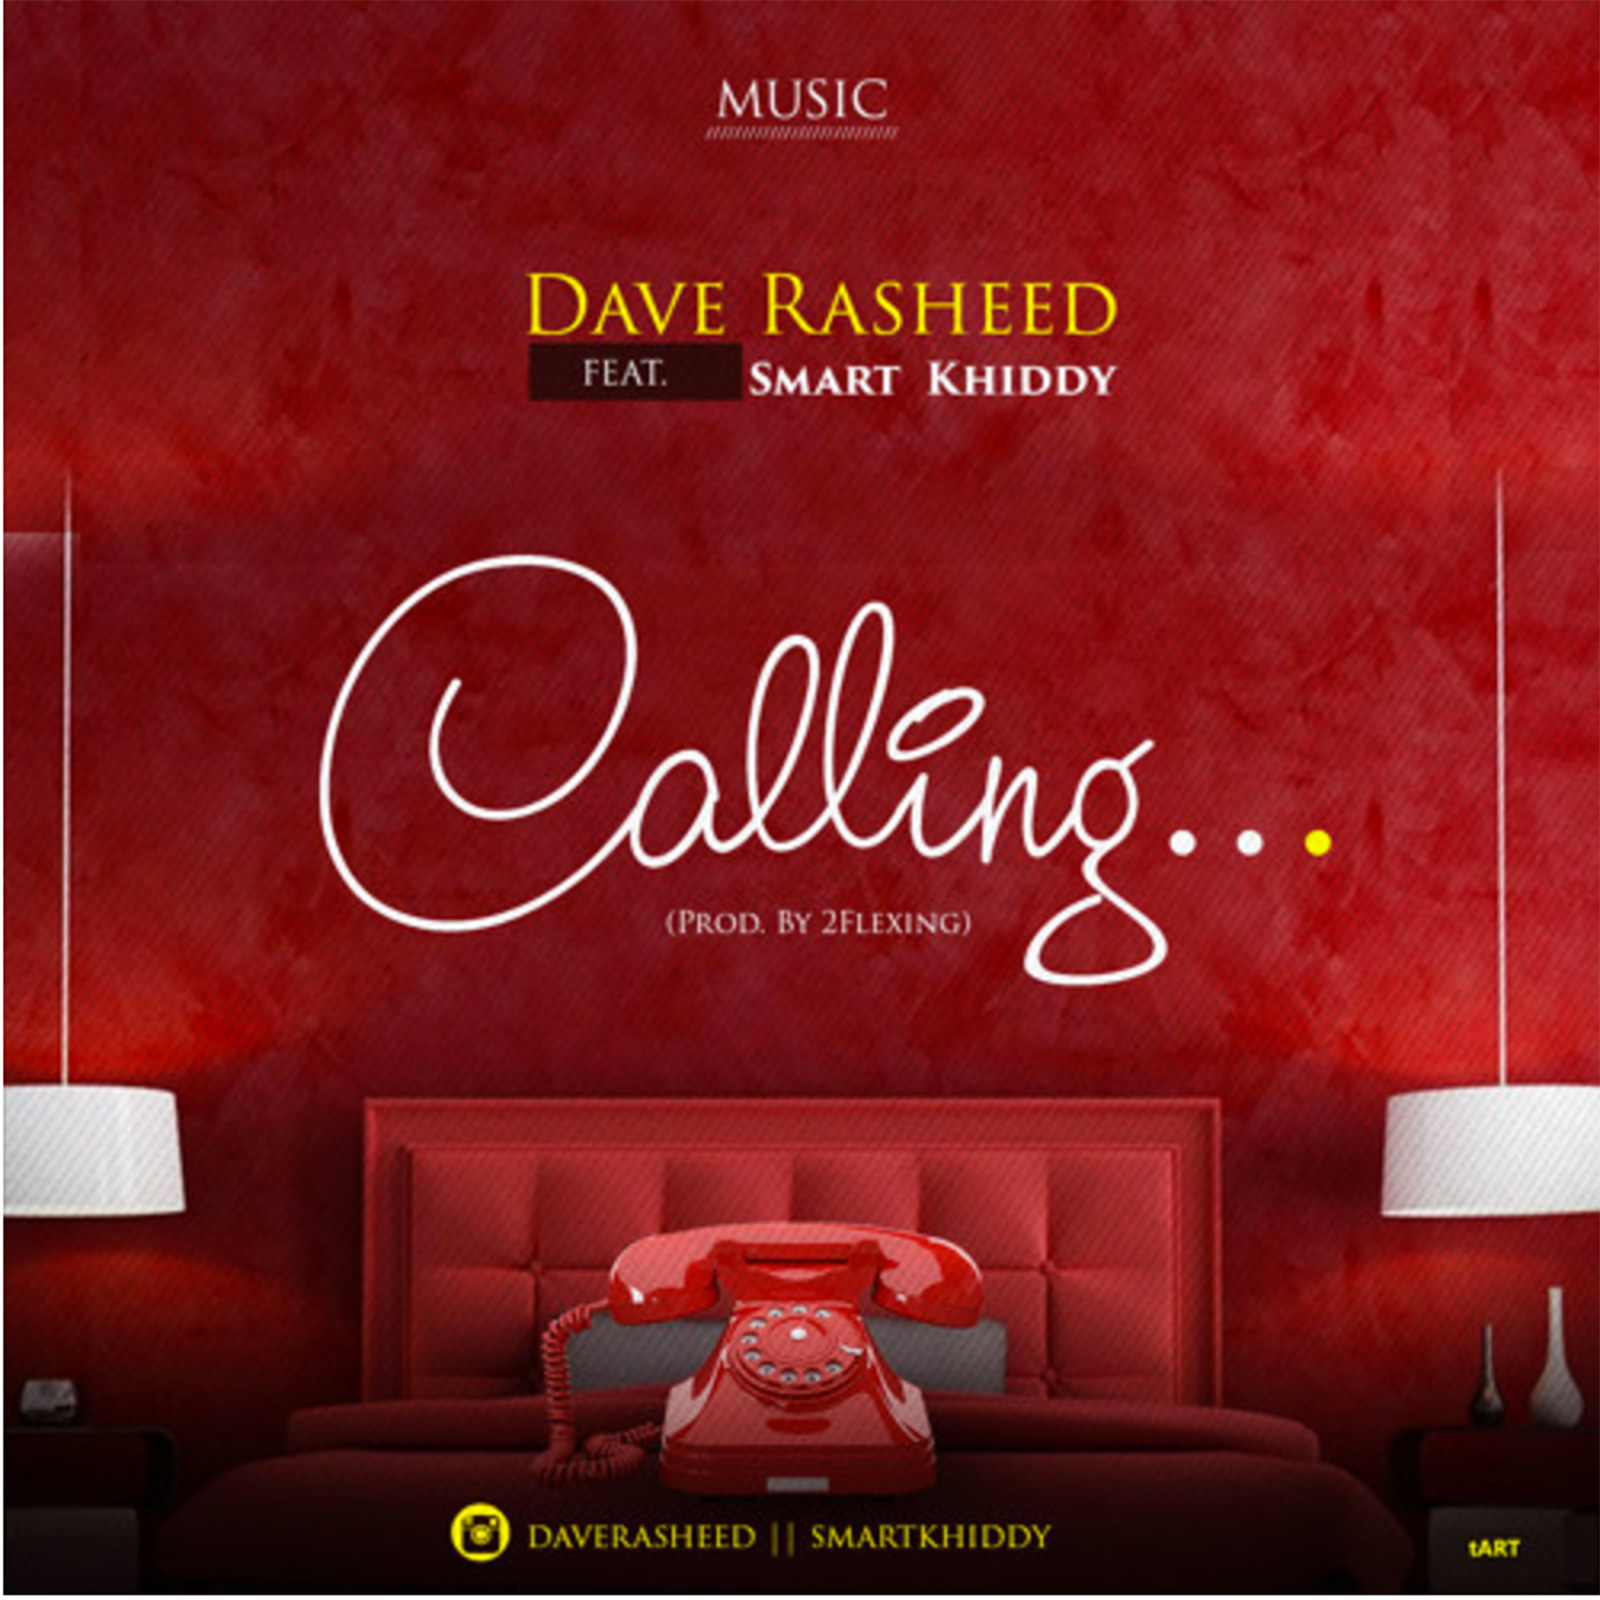 Calling by Dave Rasheed feat. Smart Khiddy